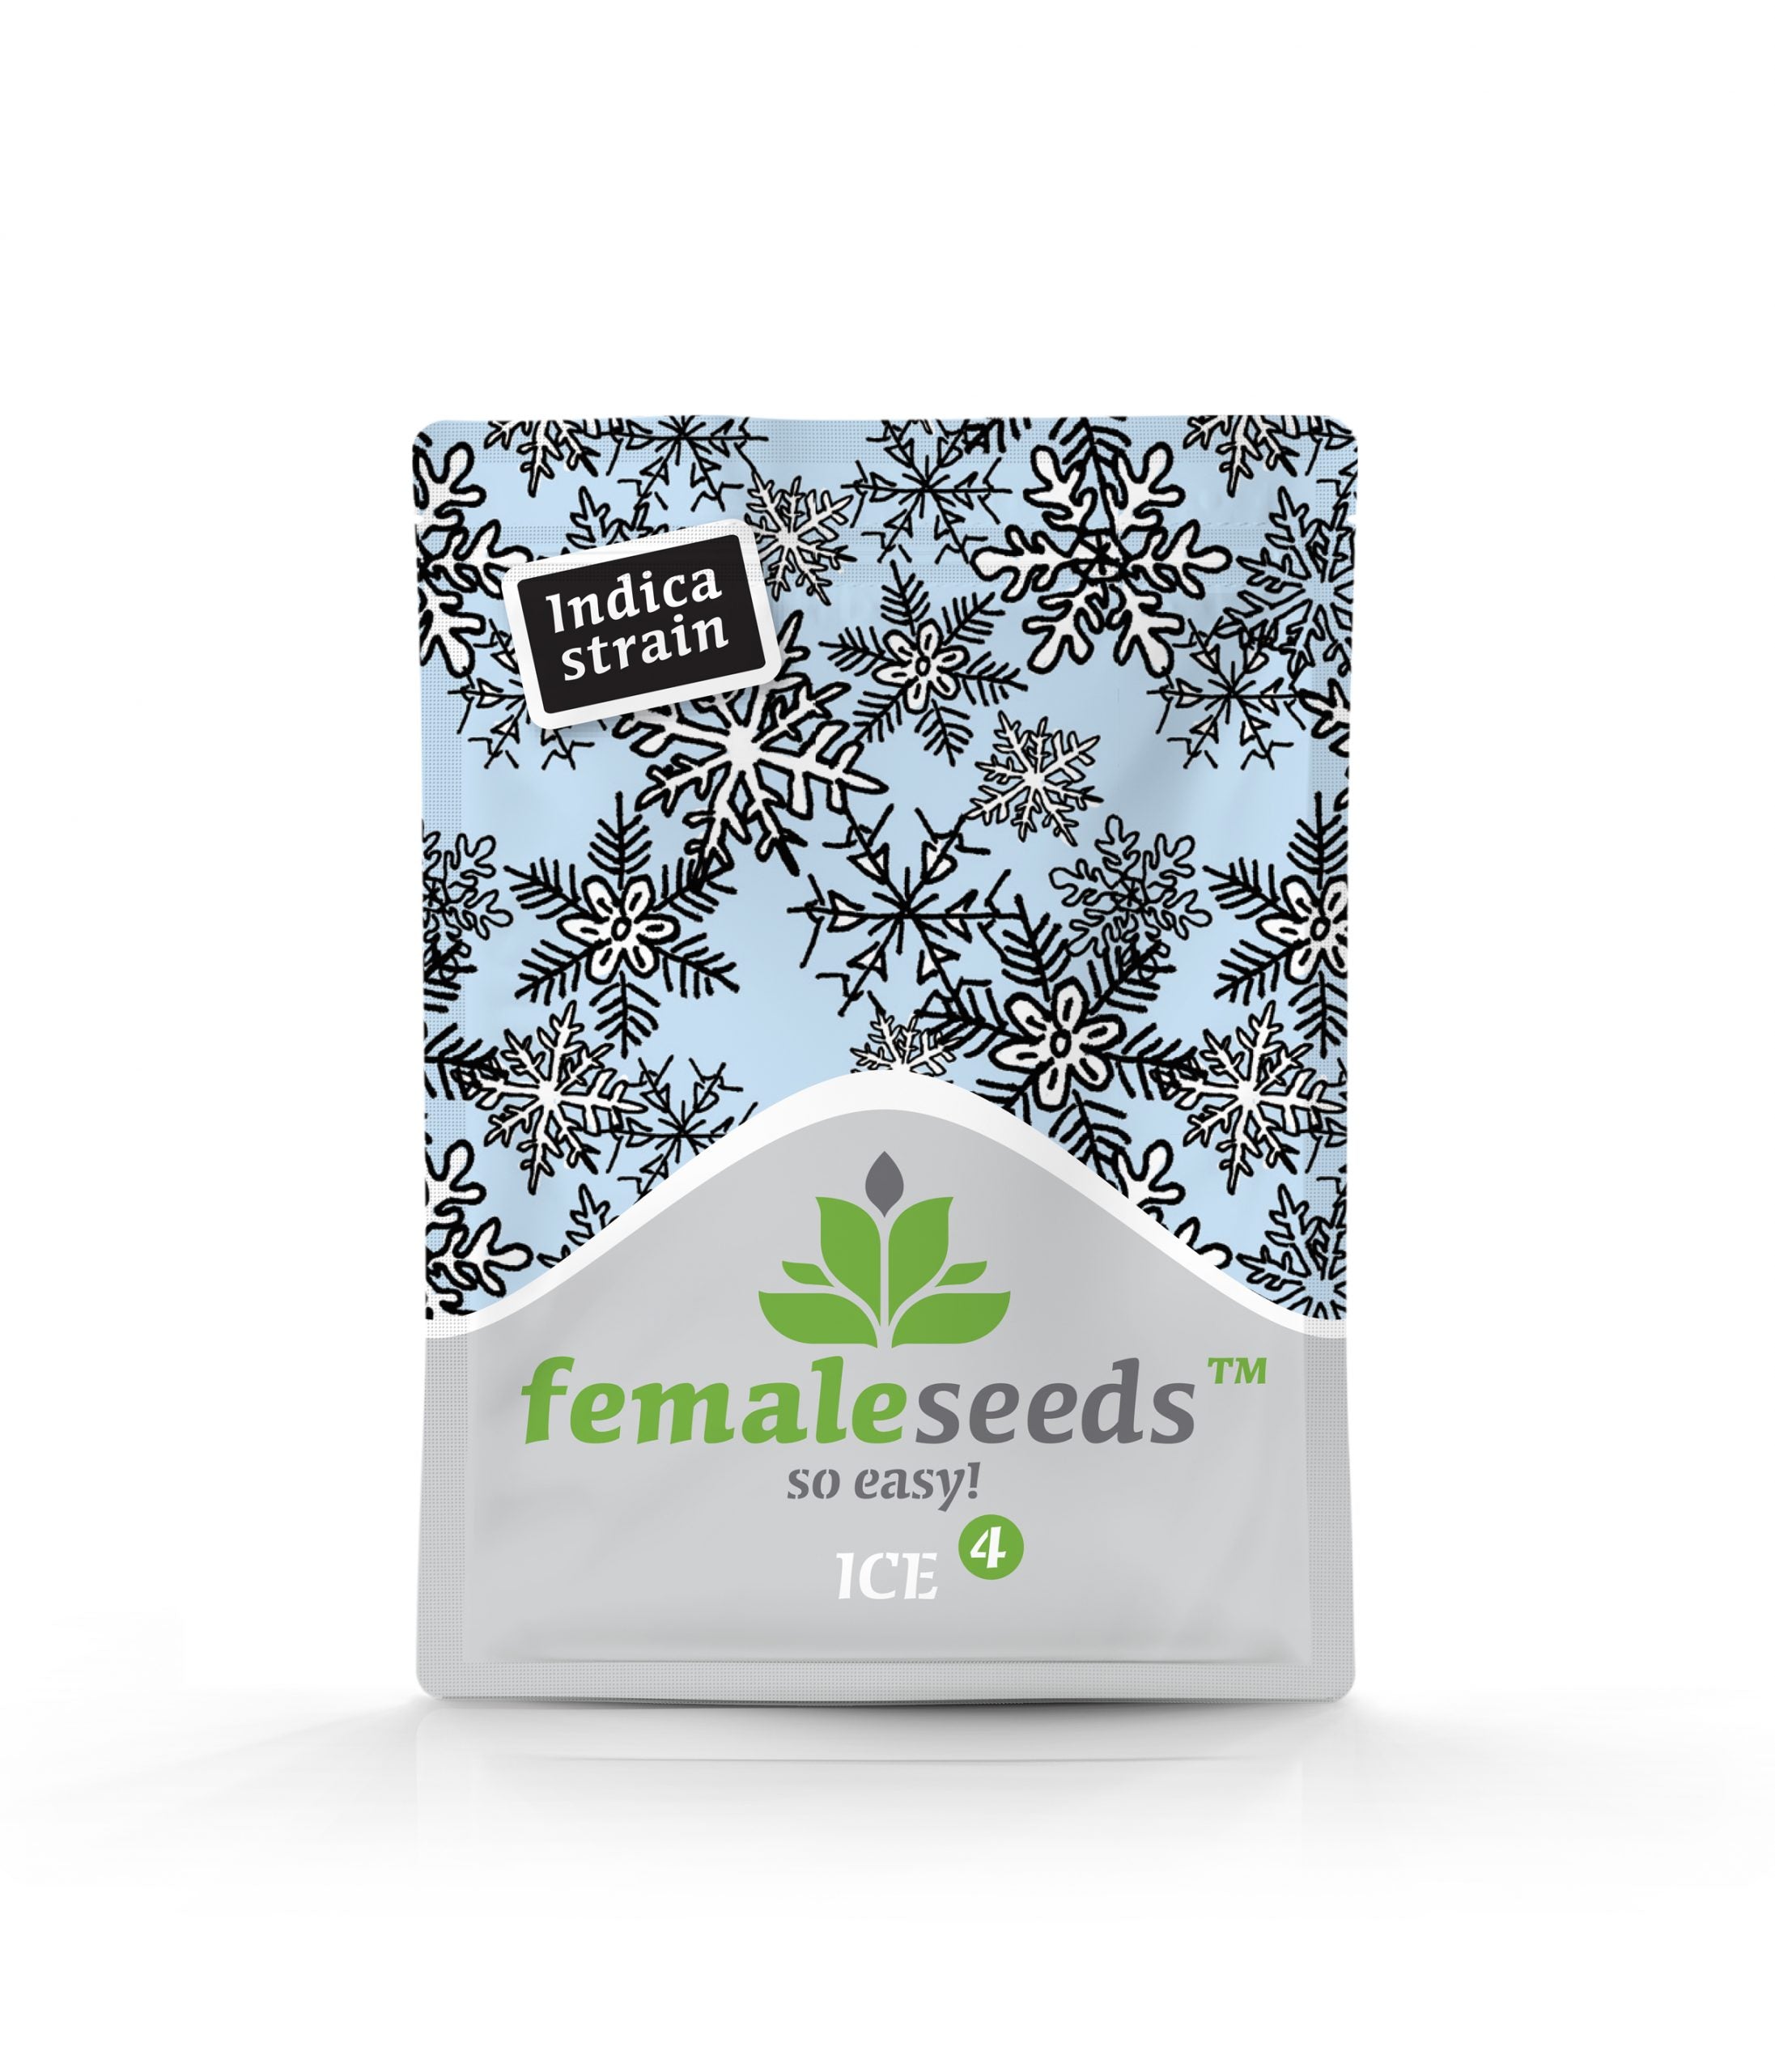 a bag of fermaleseeds on a white background